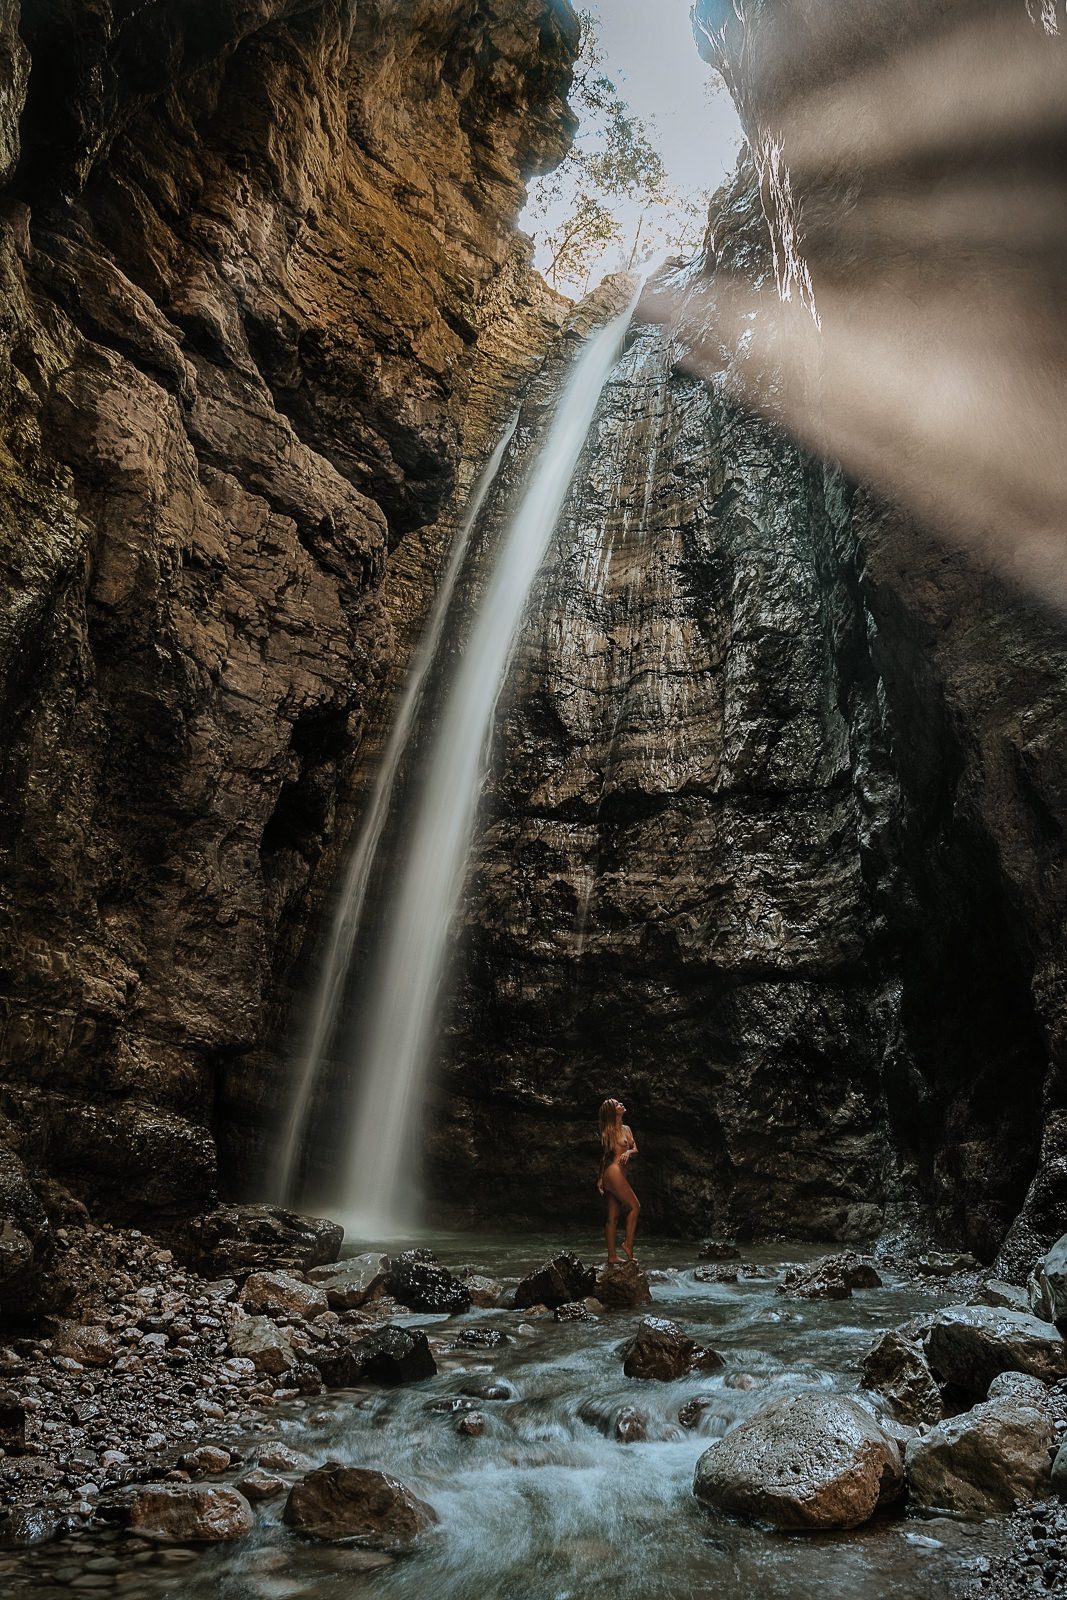 Erica Vignola photographed by Nico Ruffato in a beautiful waterfall in the Dolomites.